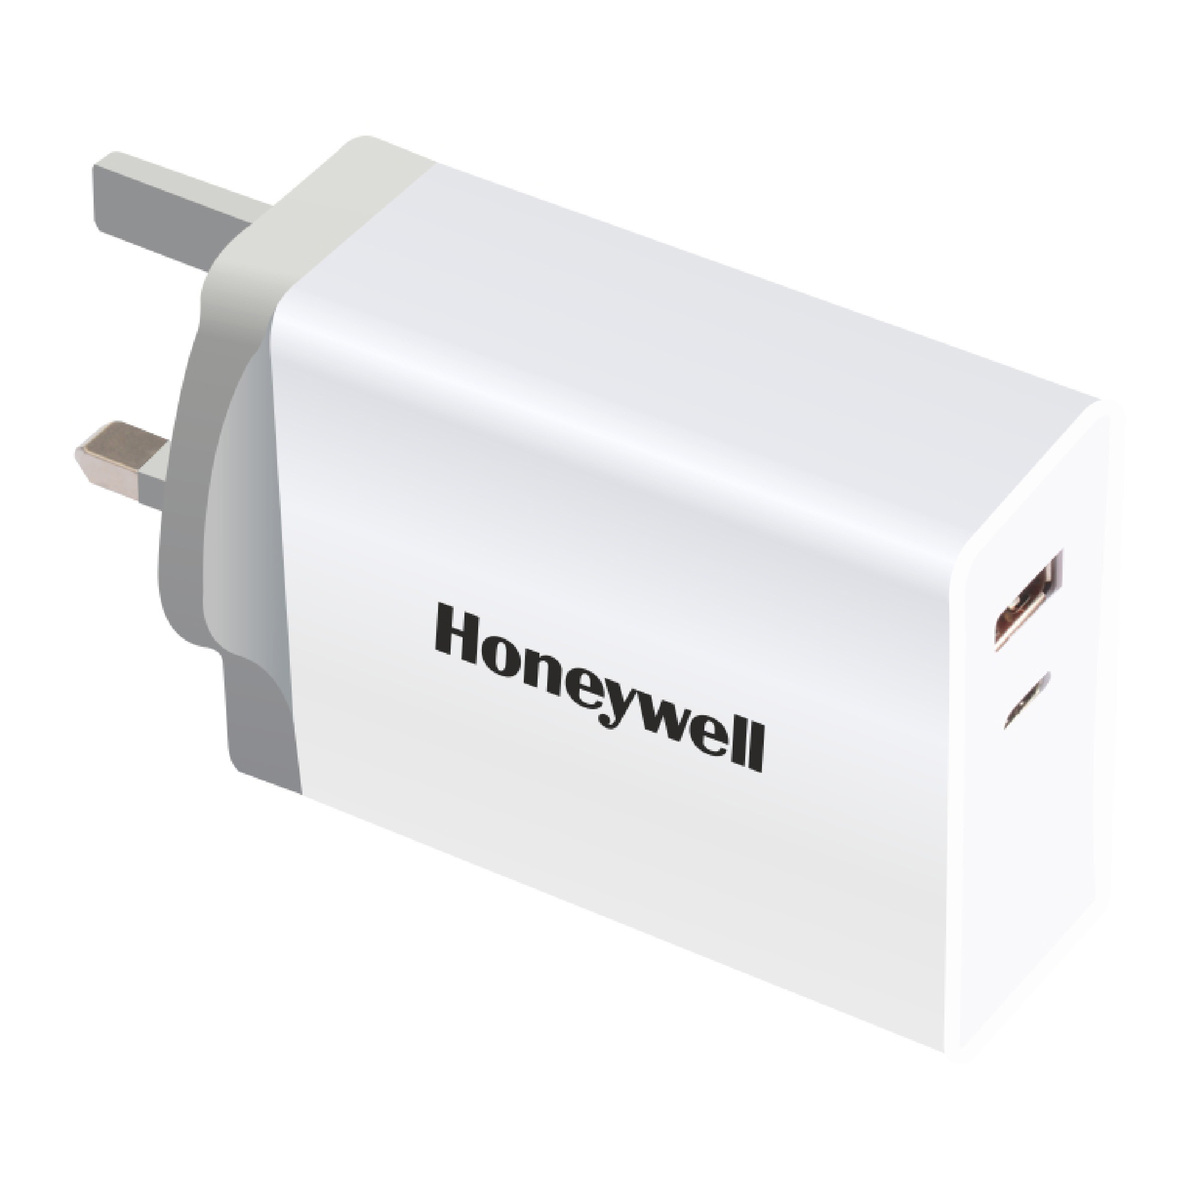 Honeywell ZEST Dual USB Wall Charger, 60 W, White, HC000016